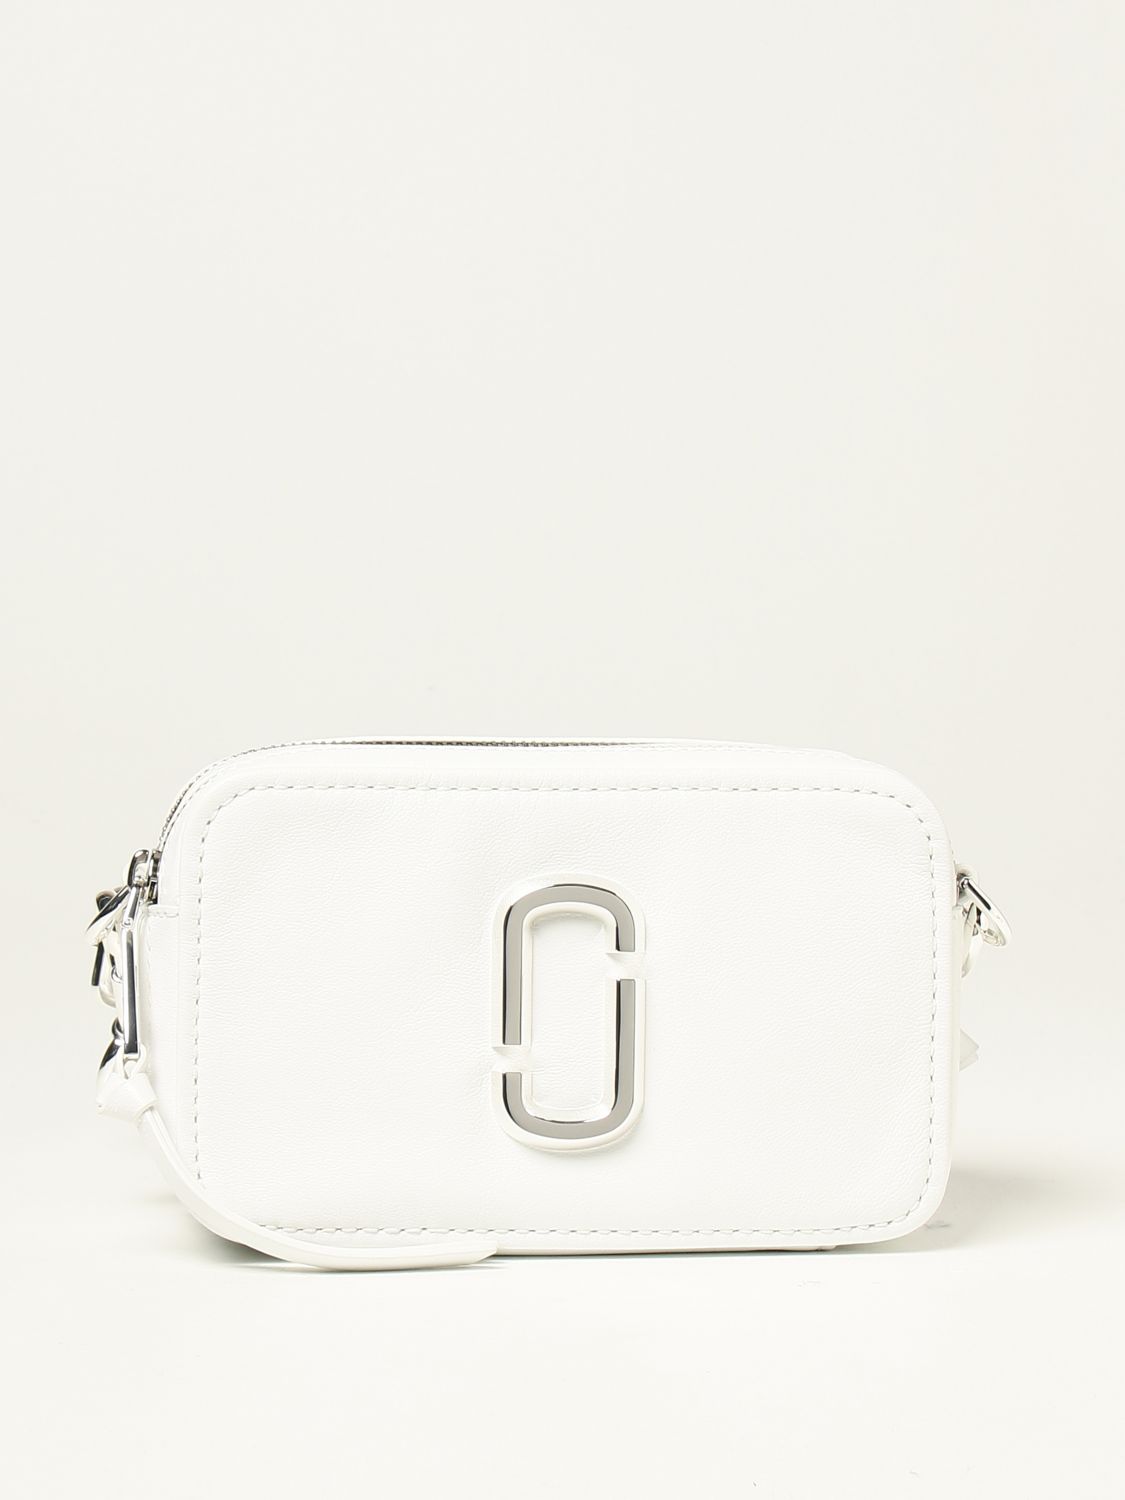 MARC JACOBS: The Snapshot leather bag - White  Marc Jacobs crossbody bags  H118L01PF21 online at